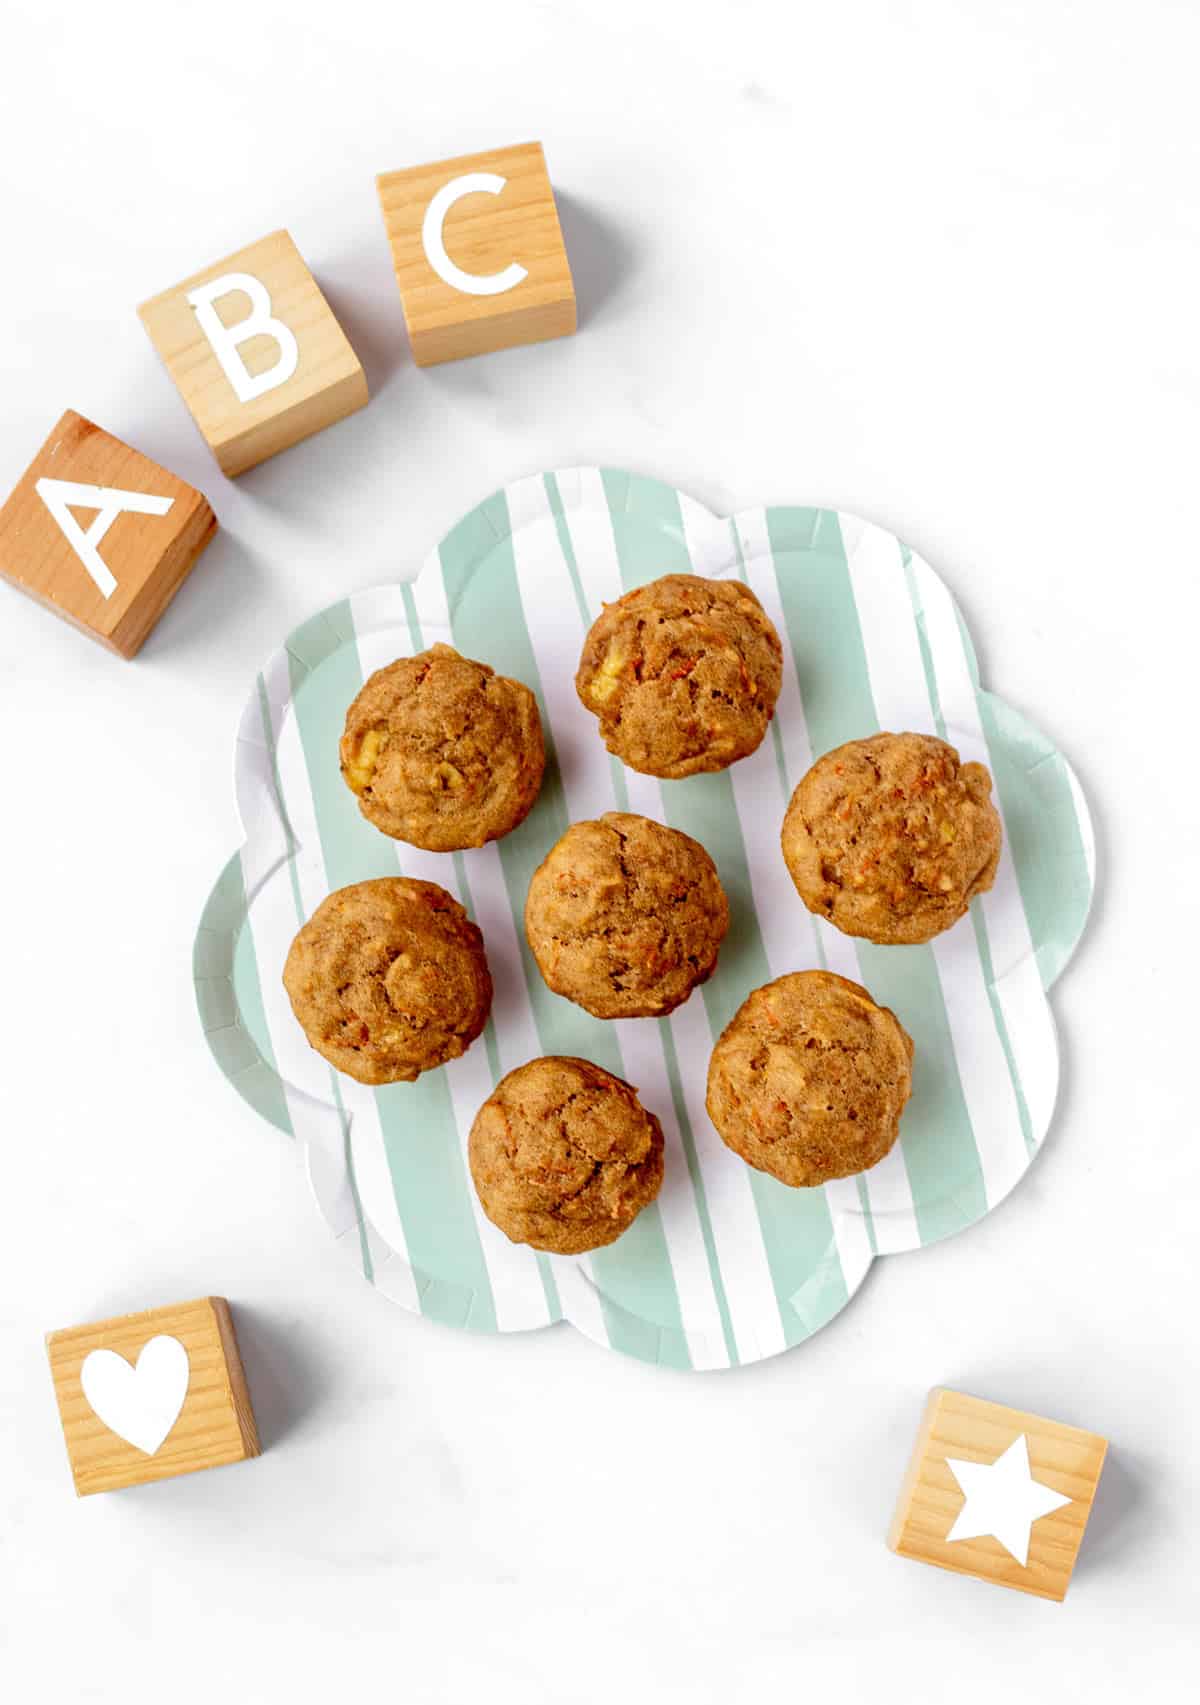 A striped plate with ABC muffins on it next to baby blocks.